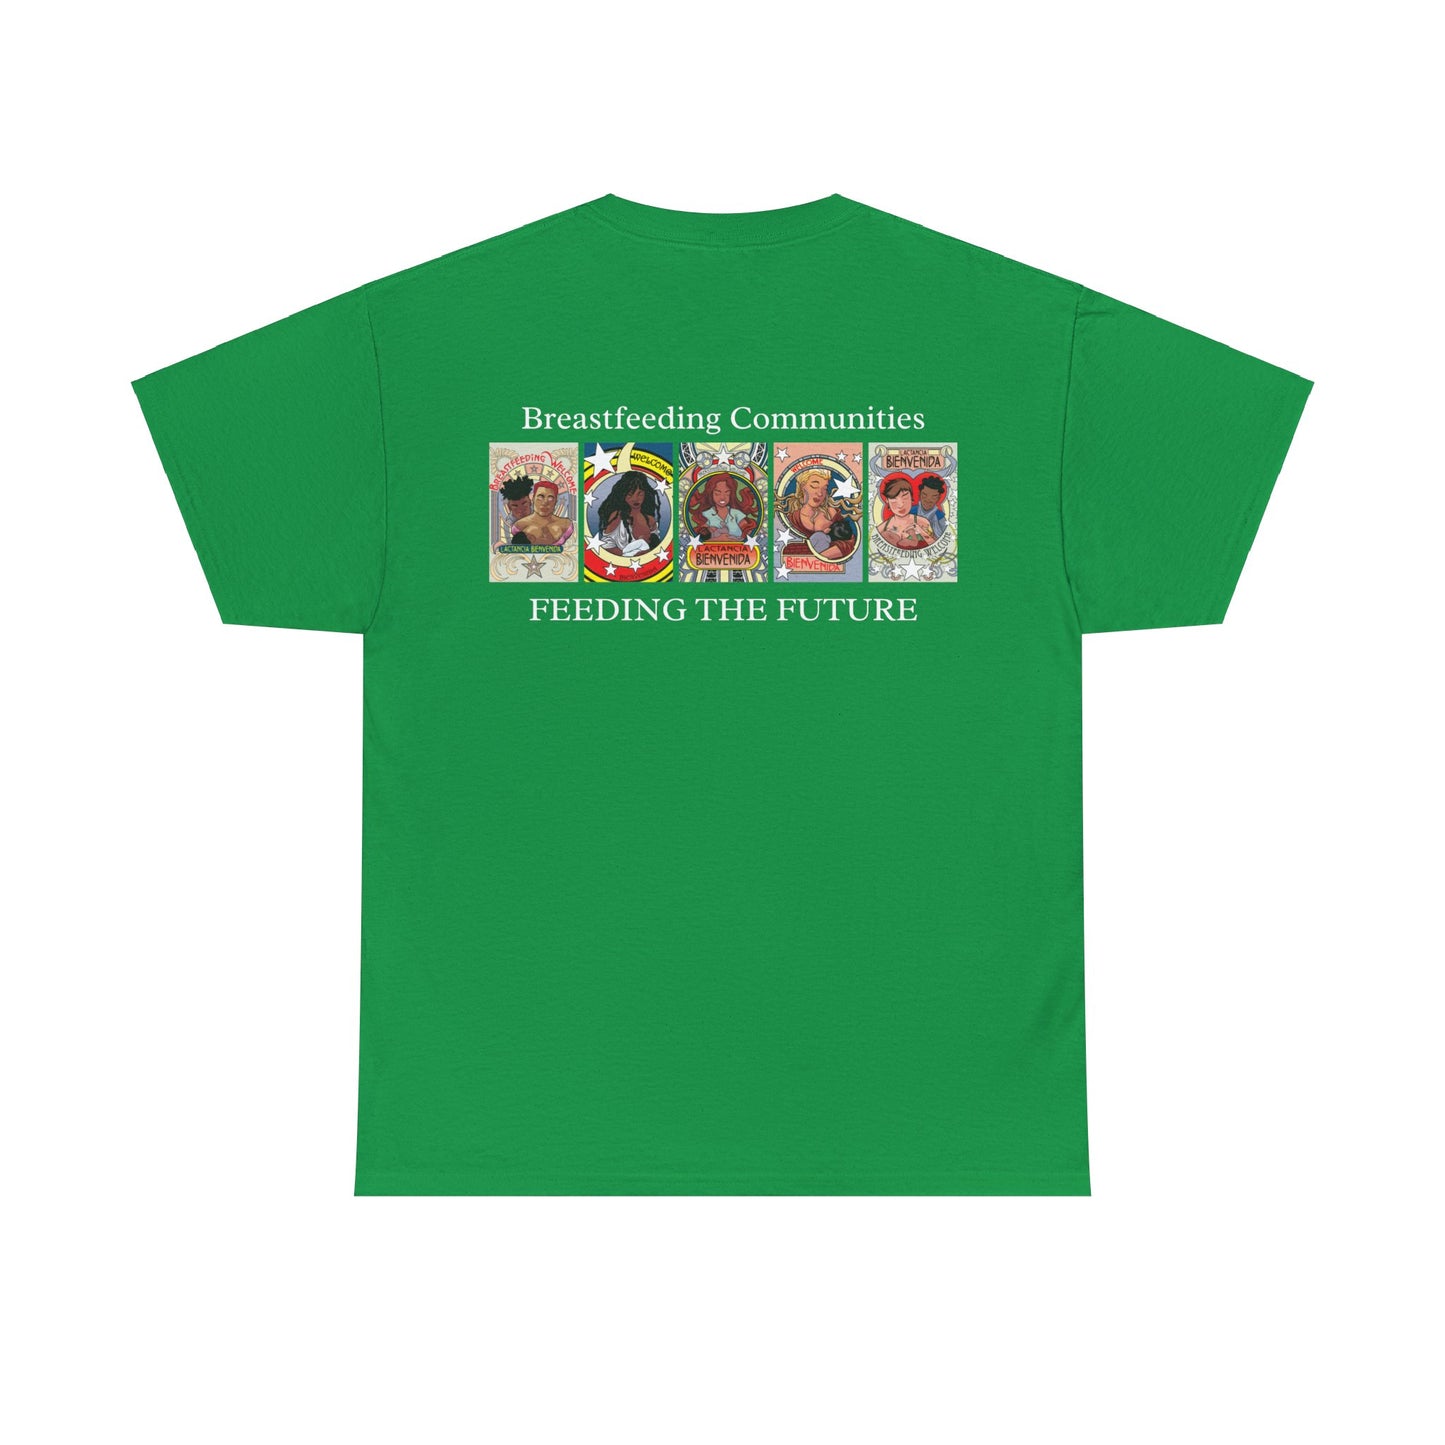 Welcome 3 (front) and Welcome 7(back) - T-shirt (back off shirt varies by color)